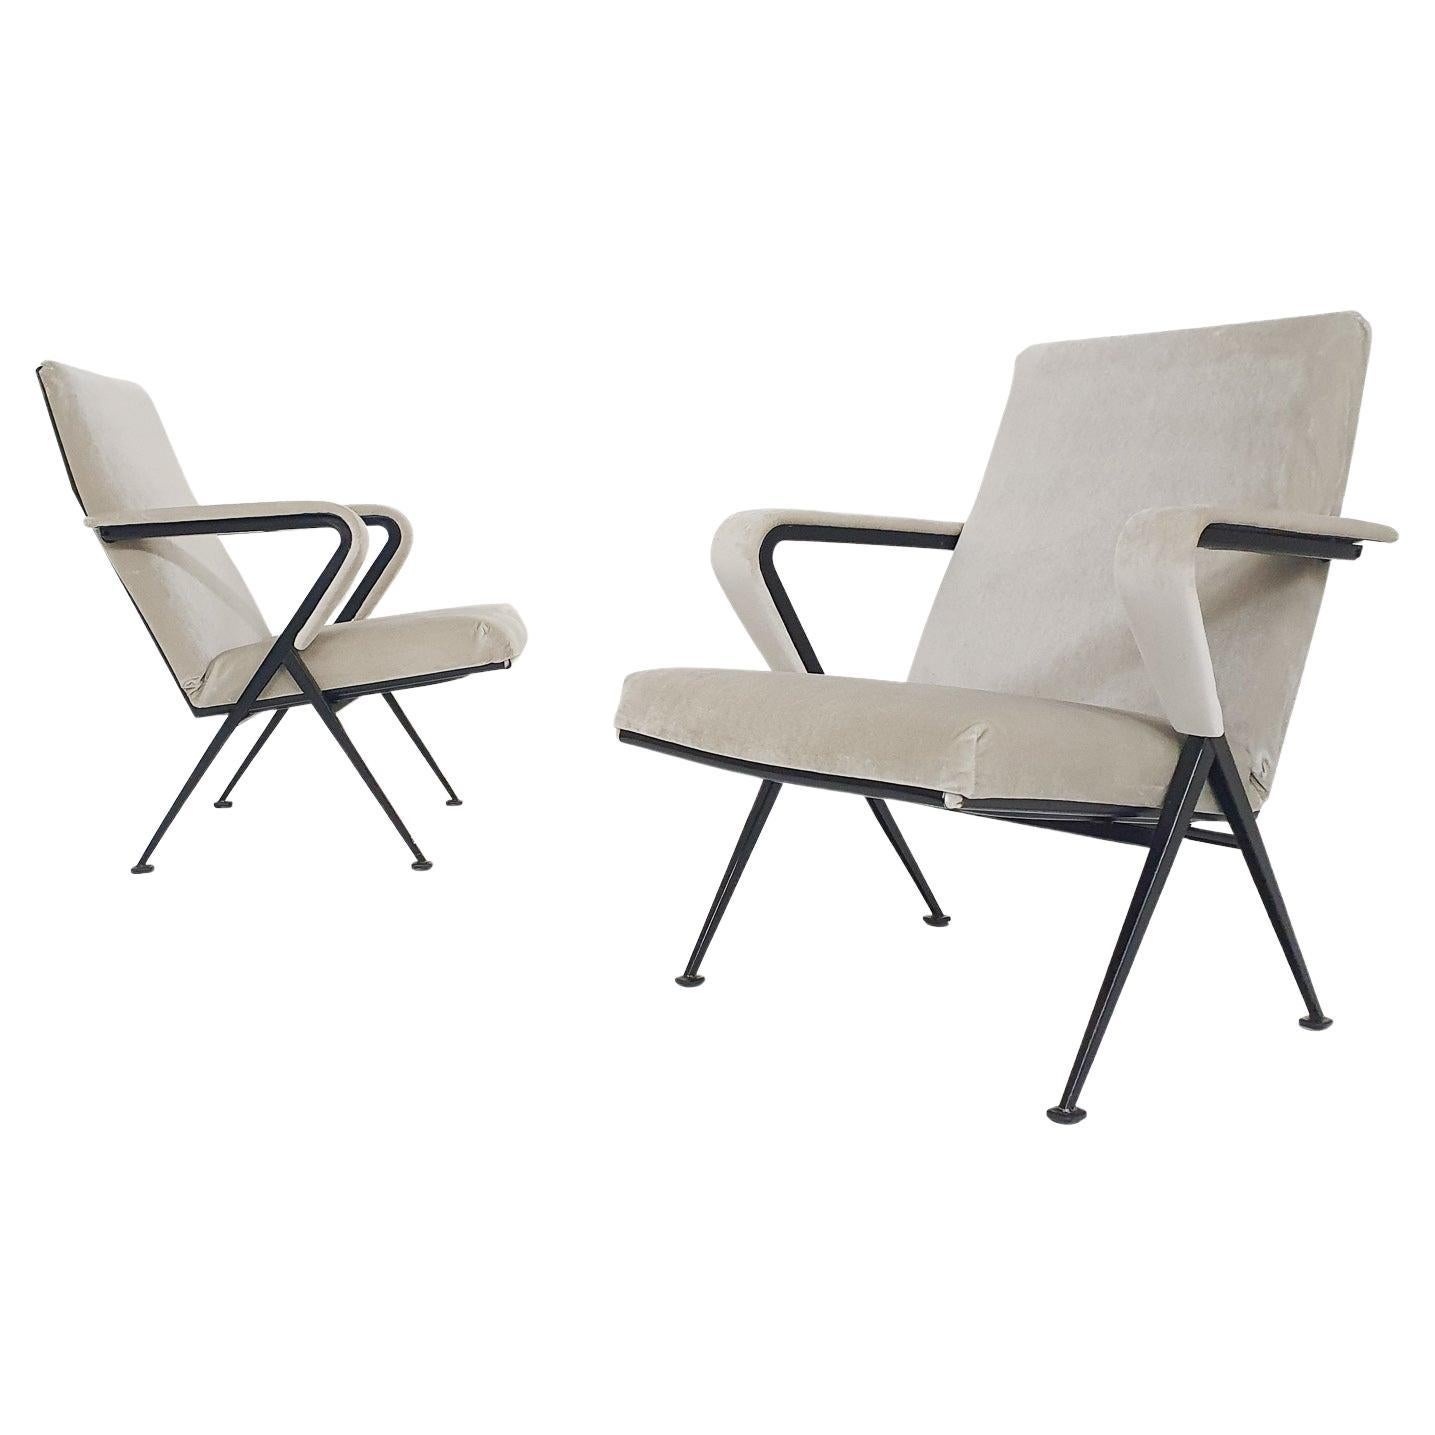 Set of two "Repose" lounge chairs by Friso Kramer for Ahrend de Cirkel For Sale